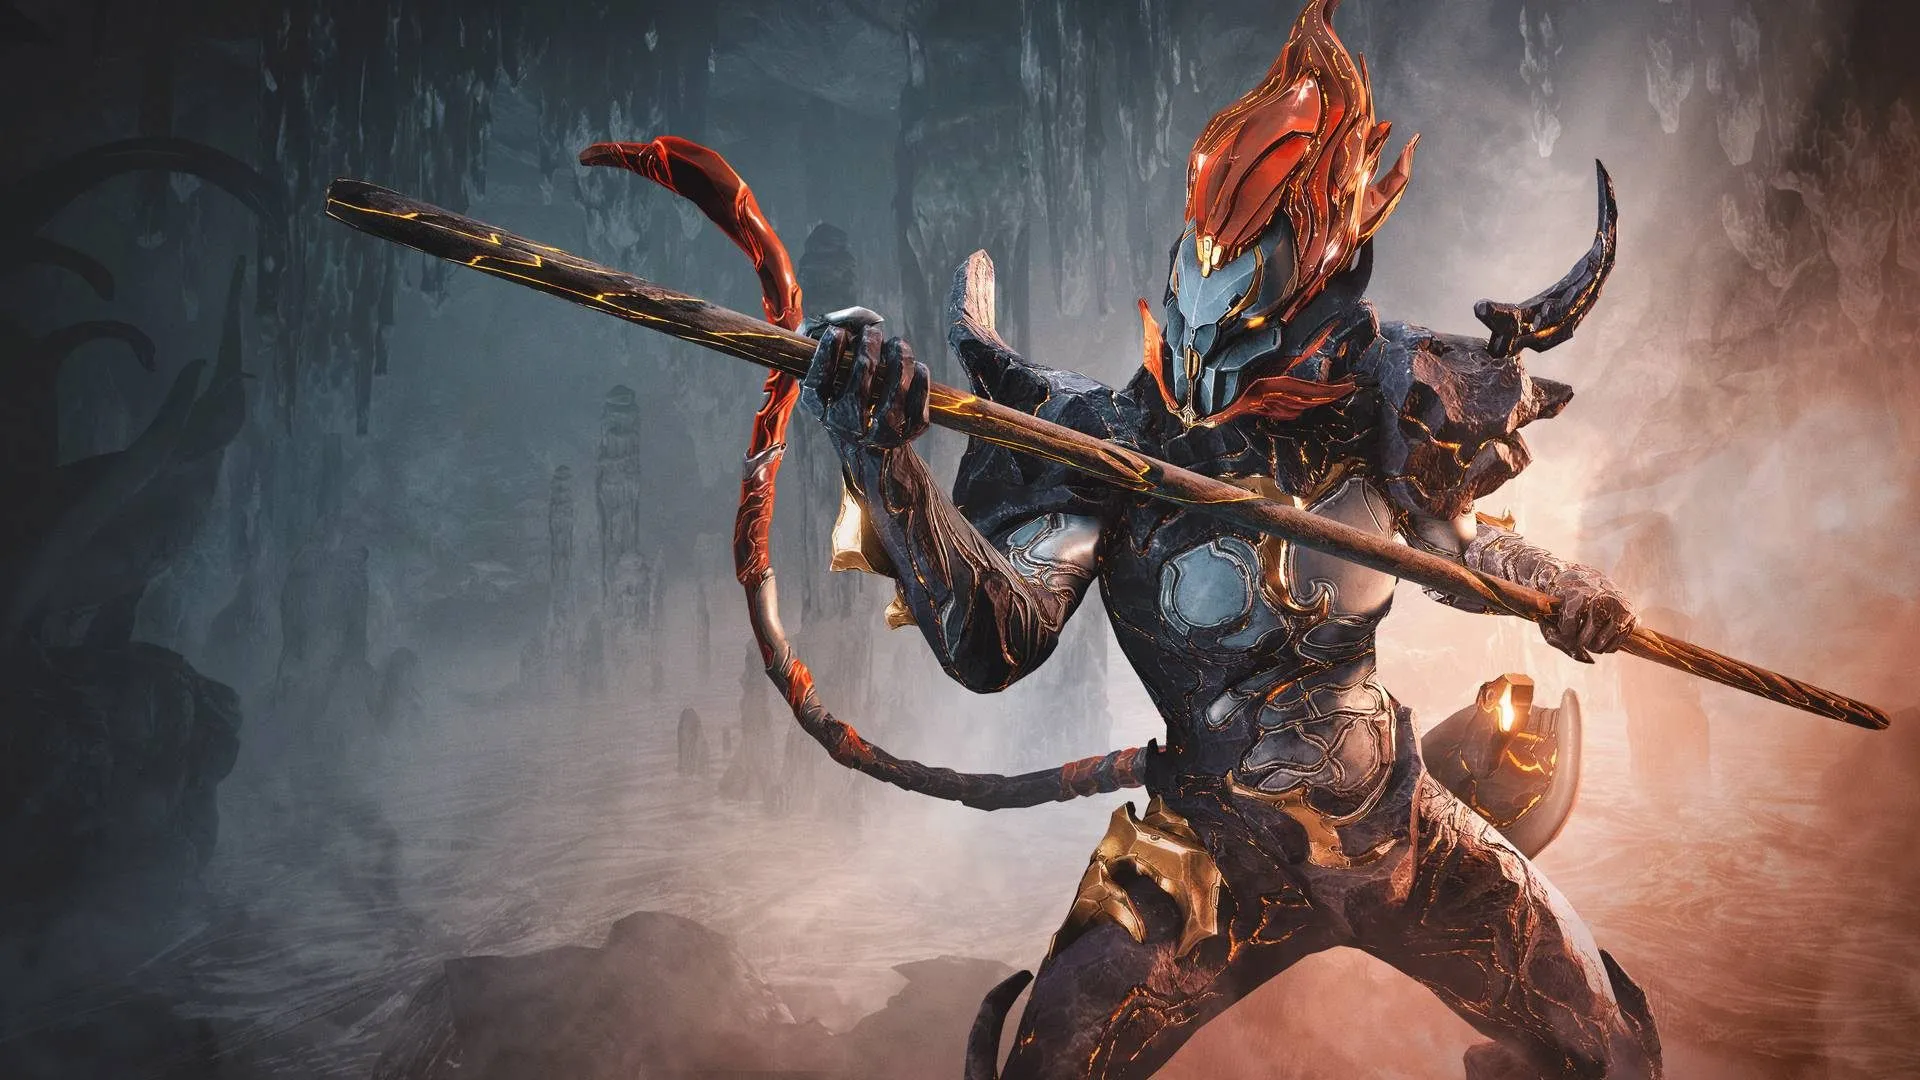 All Mods in Warframe, and how to get them -